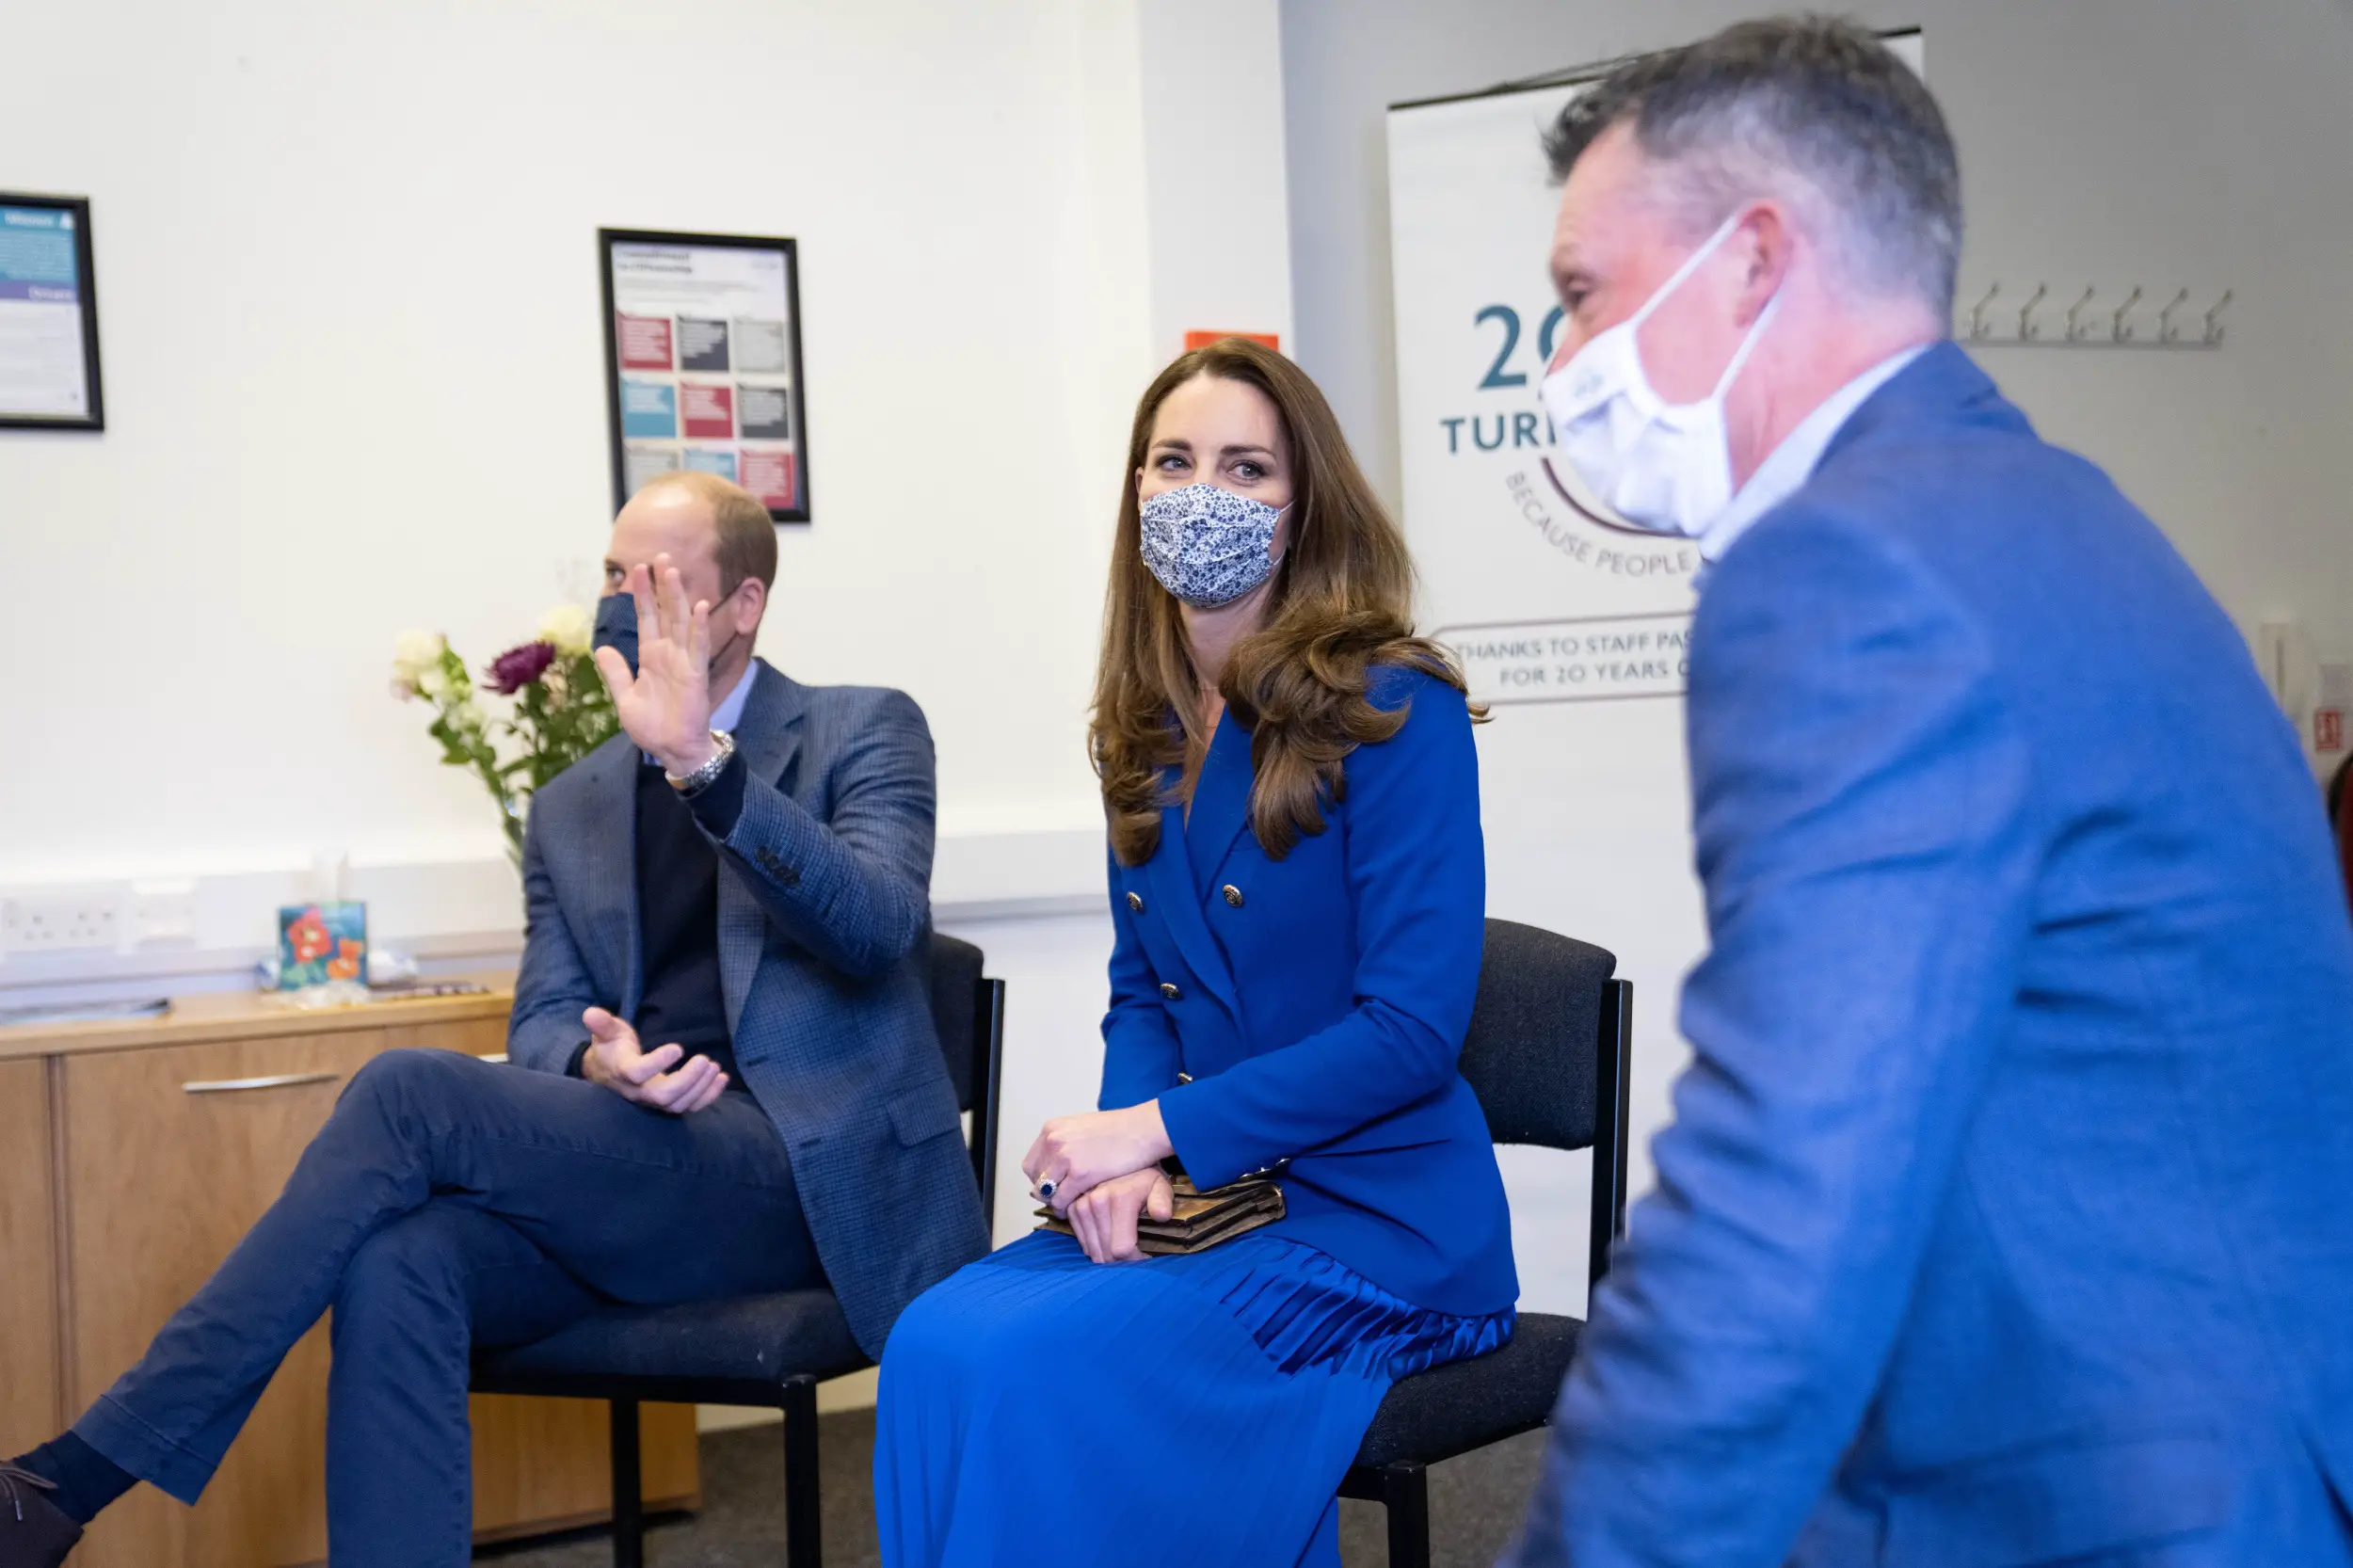 The Duke and Duchess of Cambridge visited Turning Point in Scotland